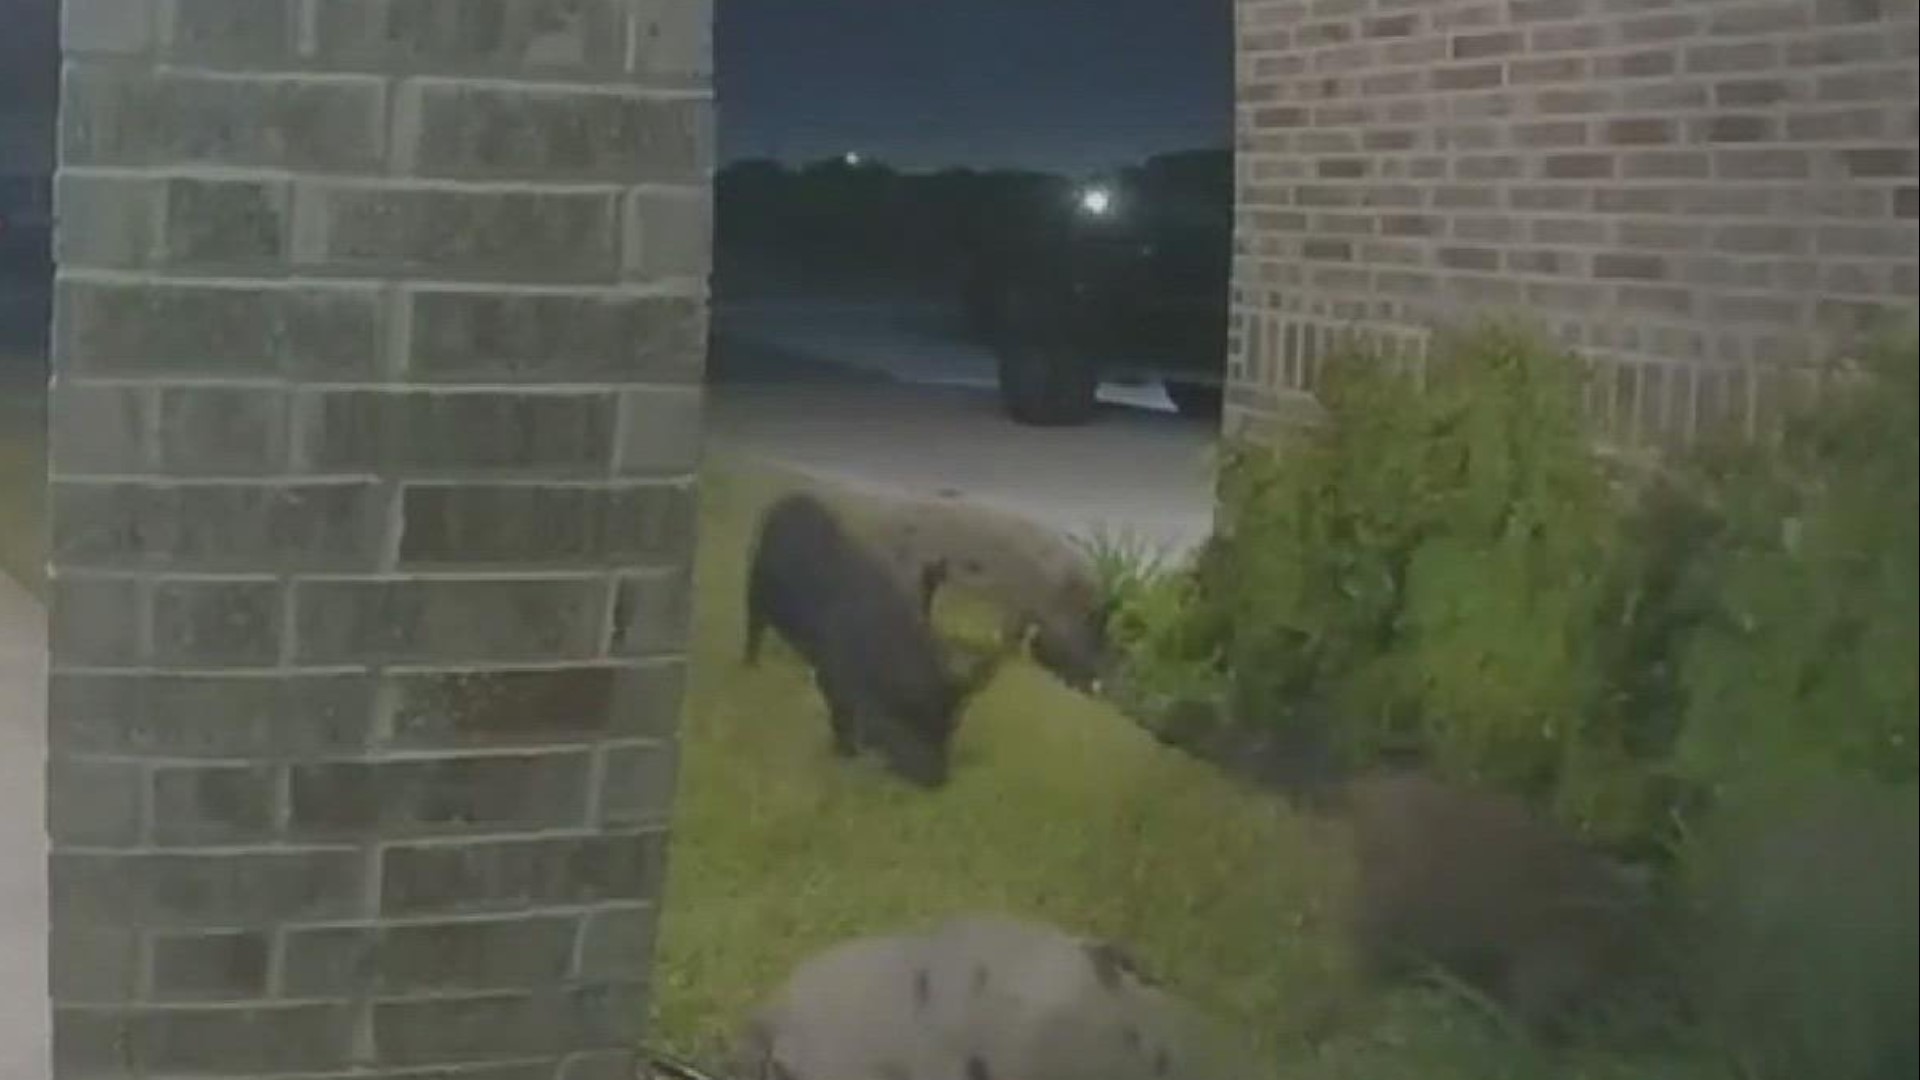 Wildlife experts say feral hogs have been an ongoing issue for housing development on the outskirts, as the wild animals have nowhere to go.